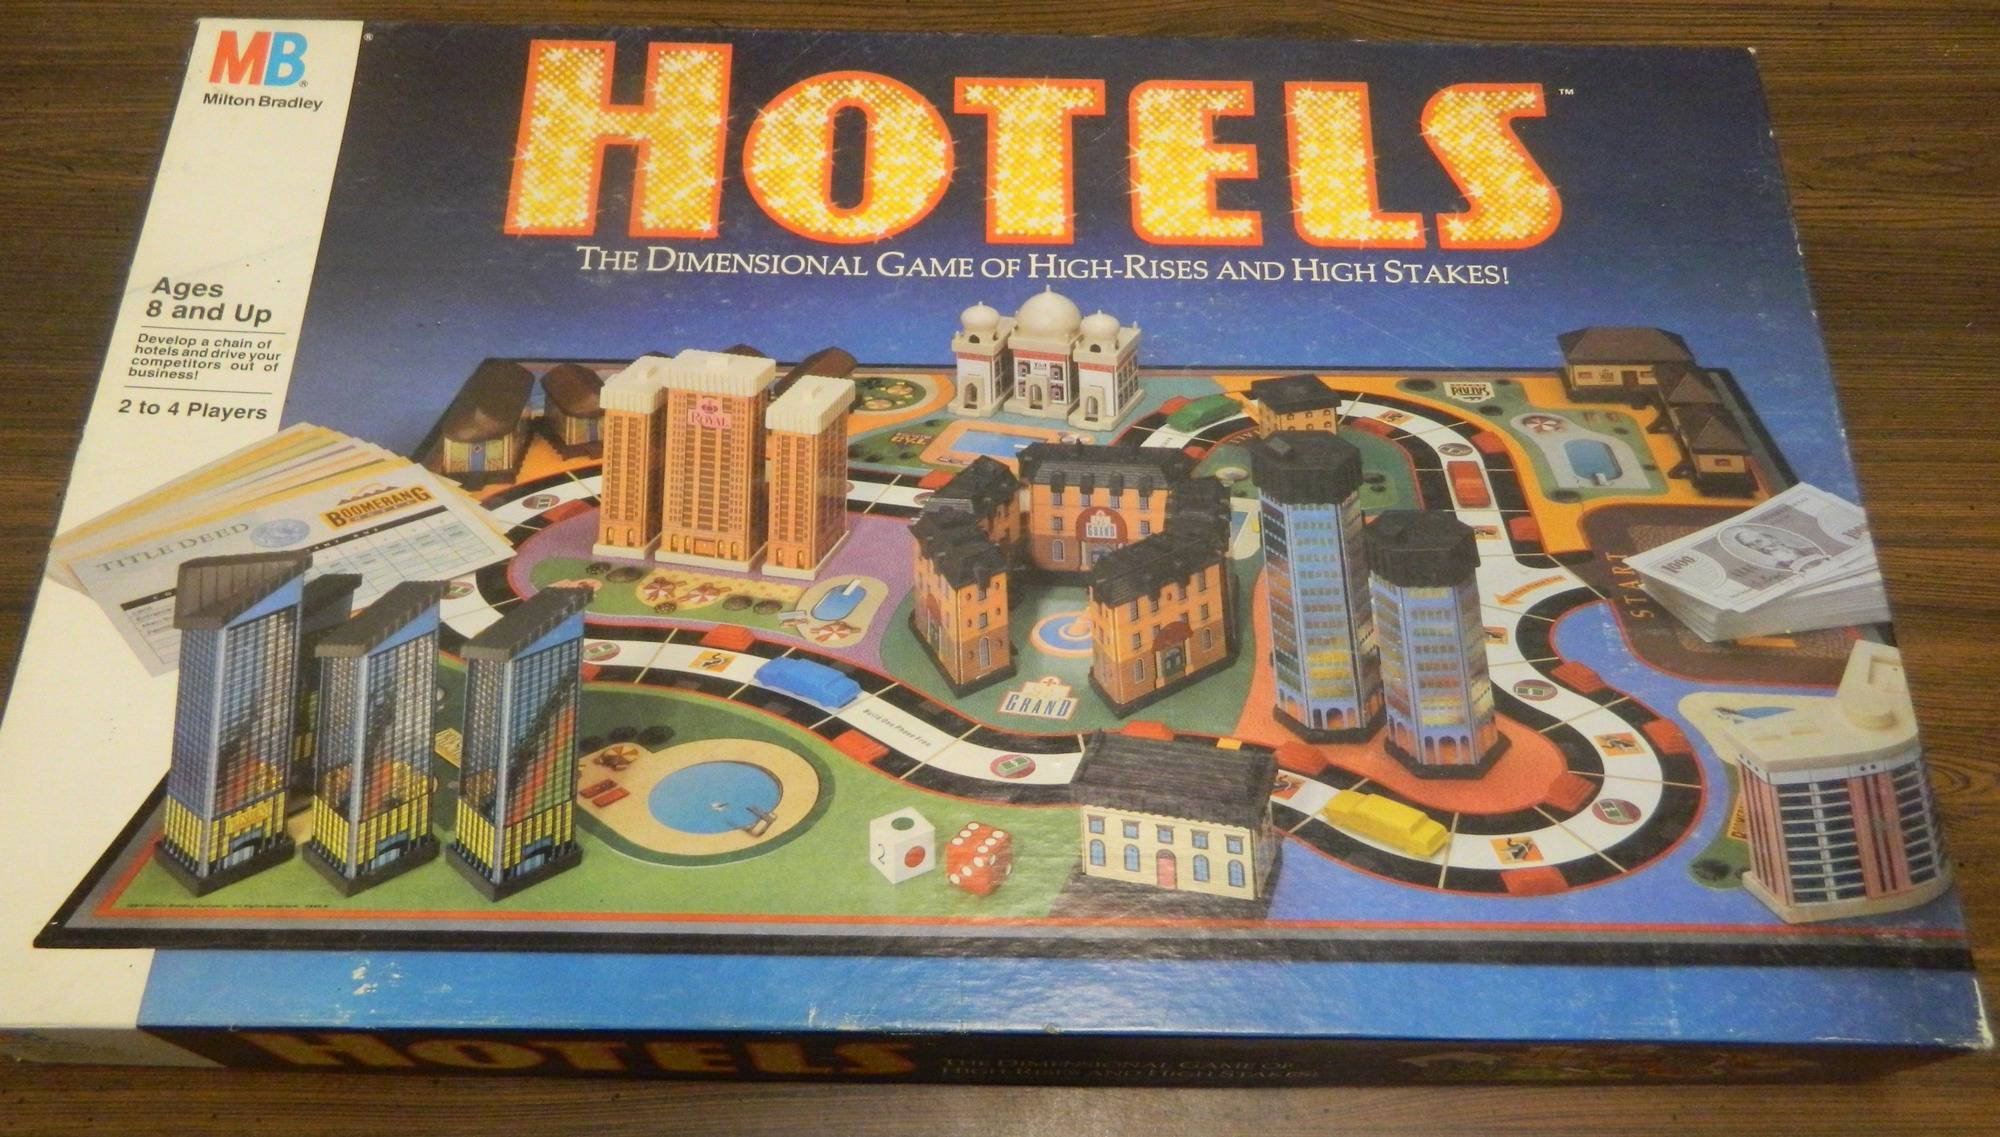 Hotels AKA Hotel Tycoon Board Game Review and Rules